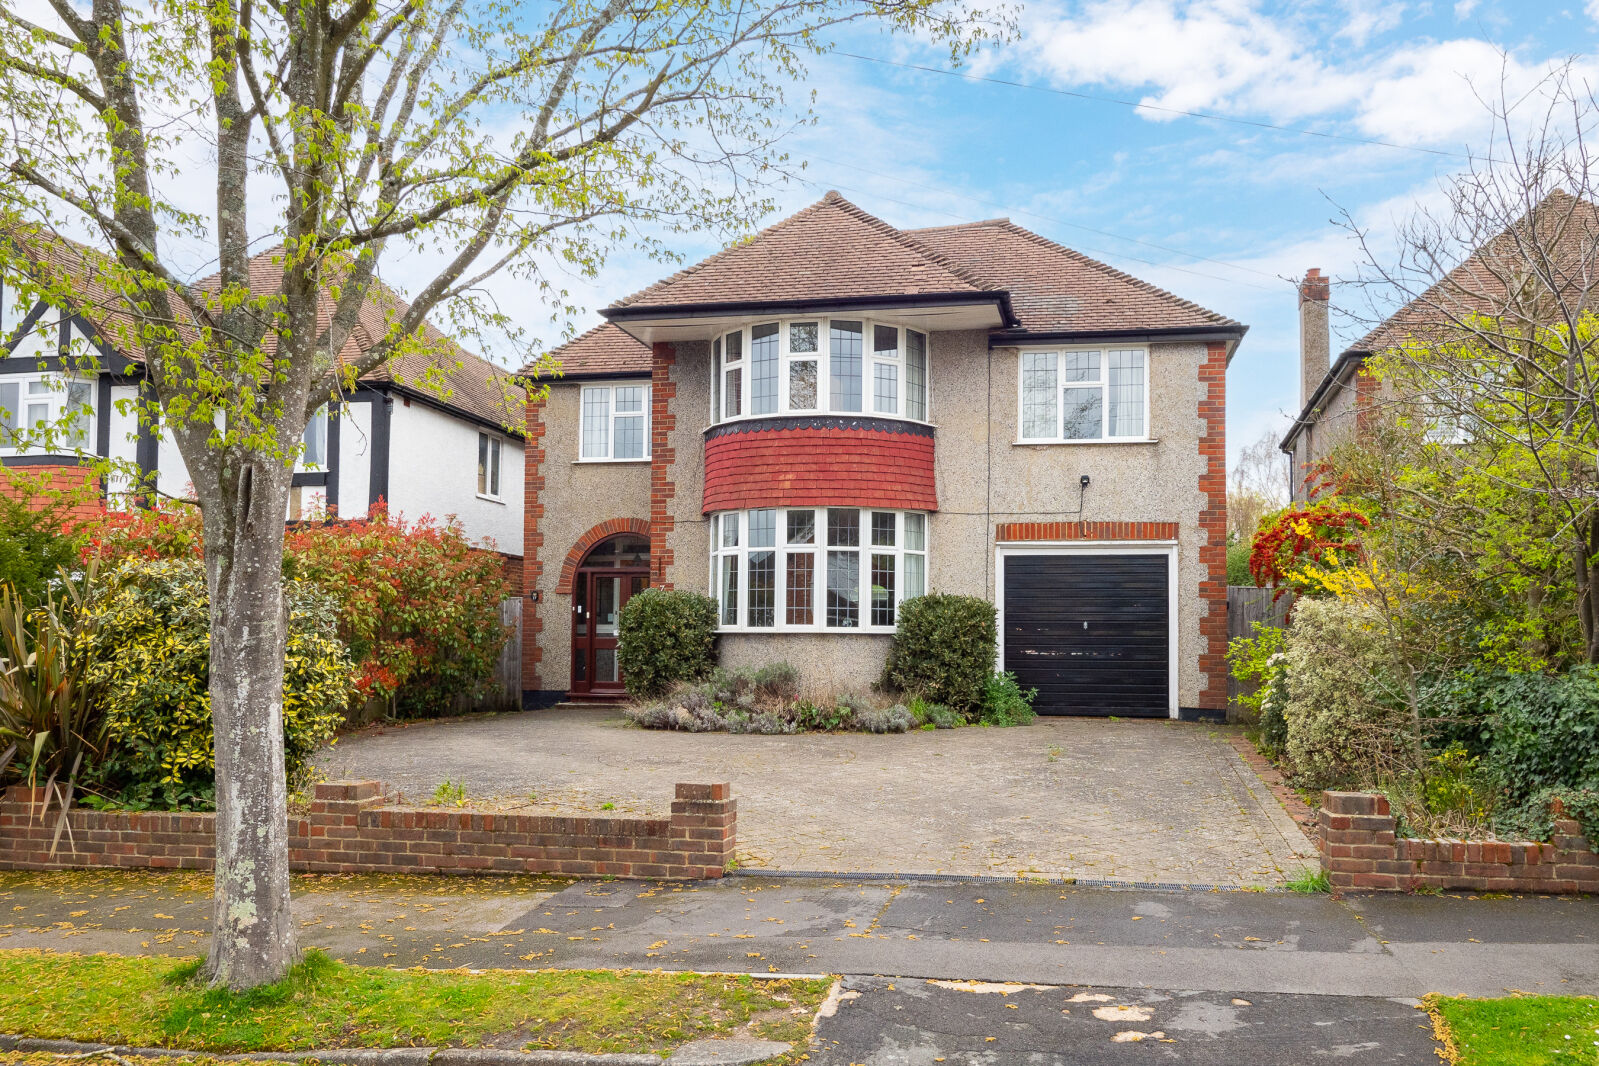 4 bedroom detached house for sale Shere Avenue, Cheam, SM2, main image